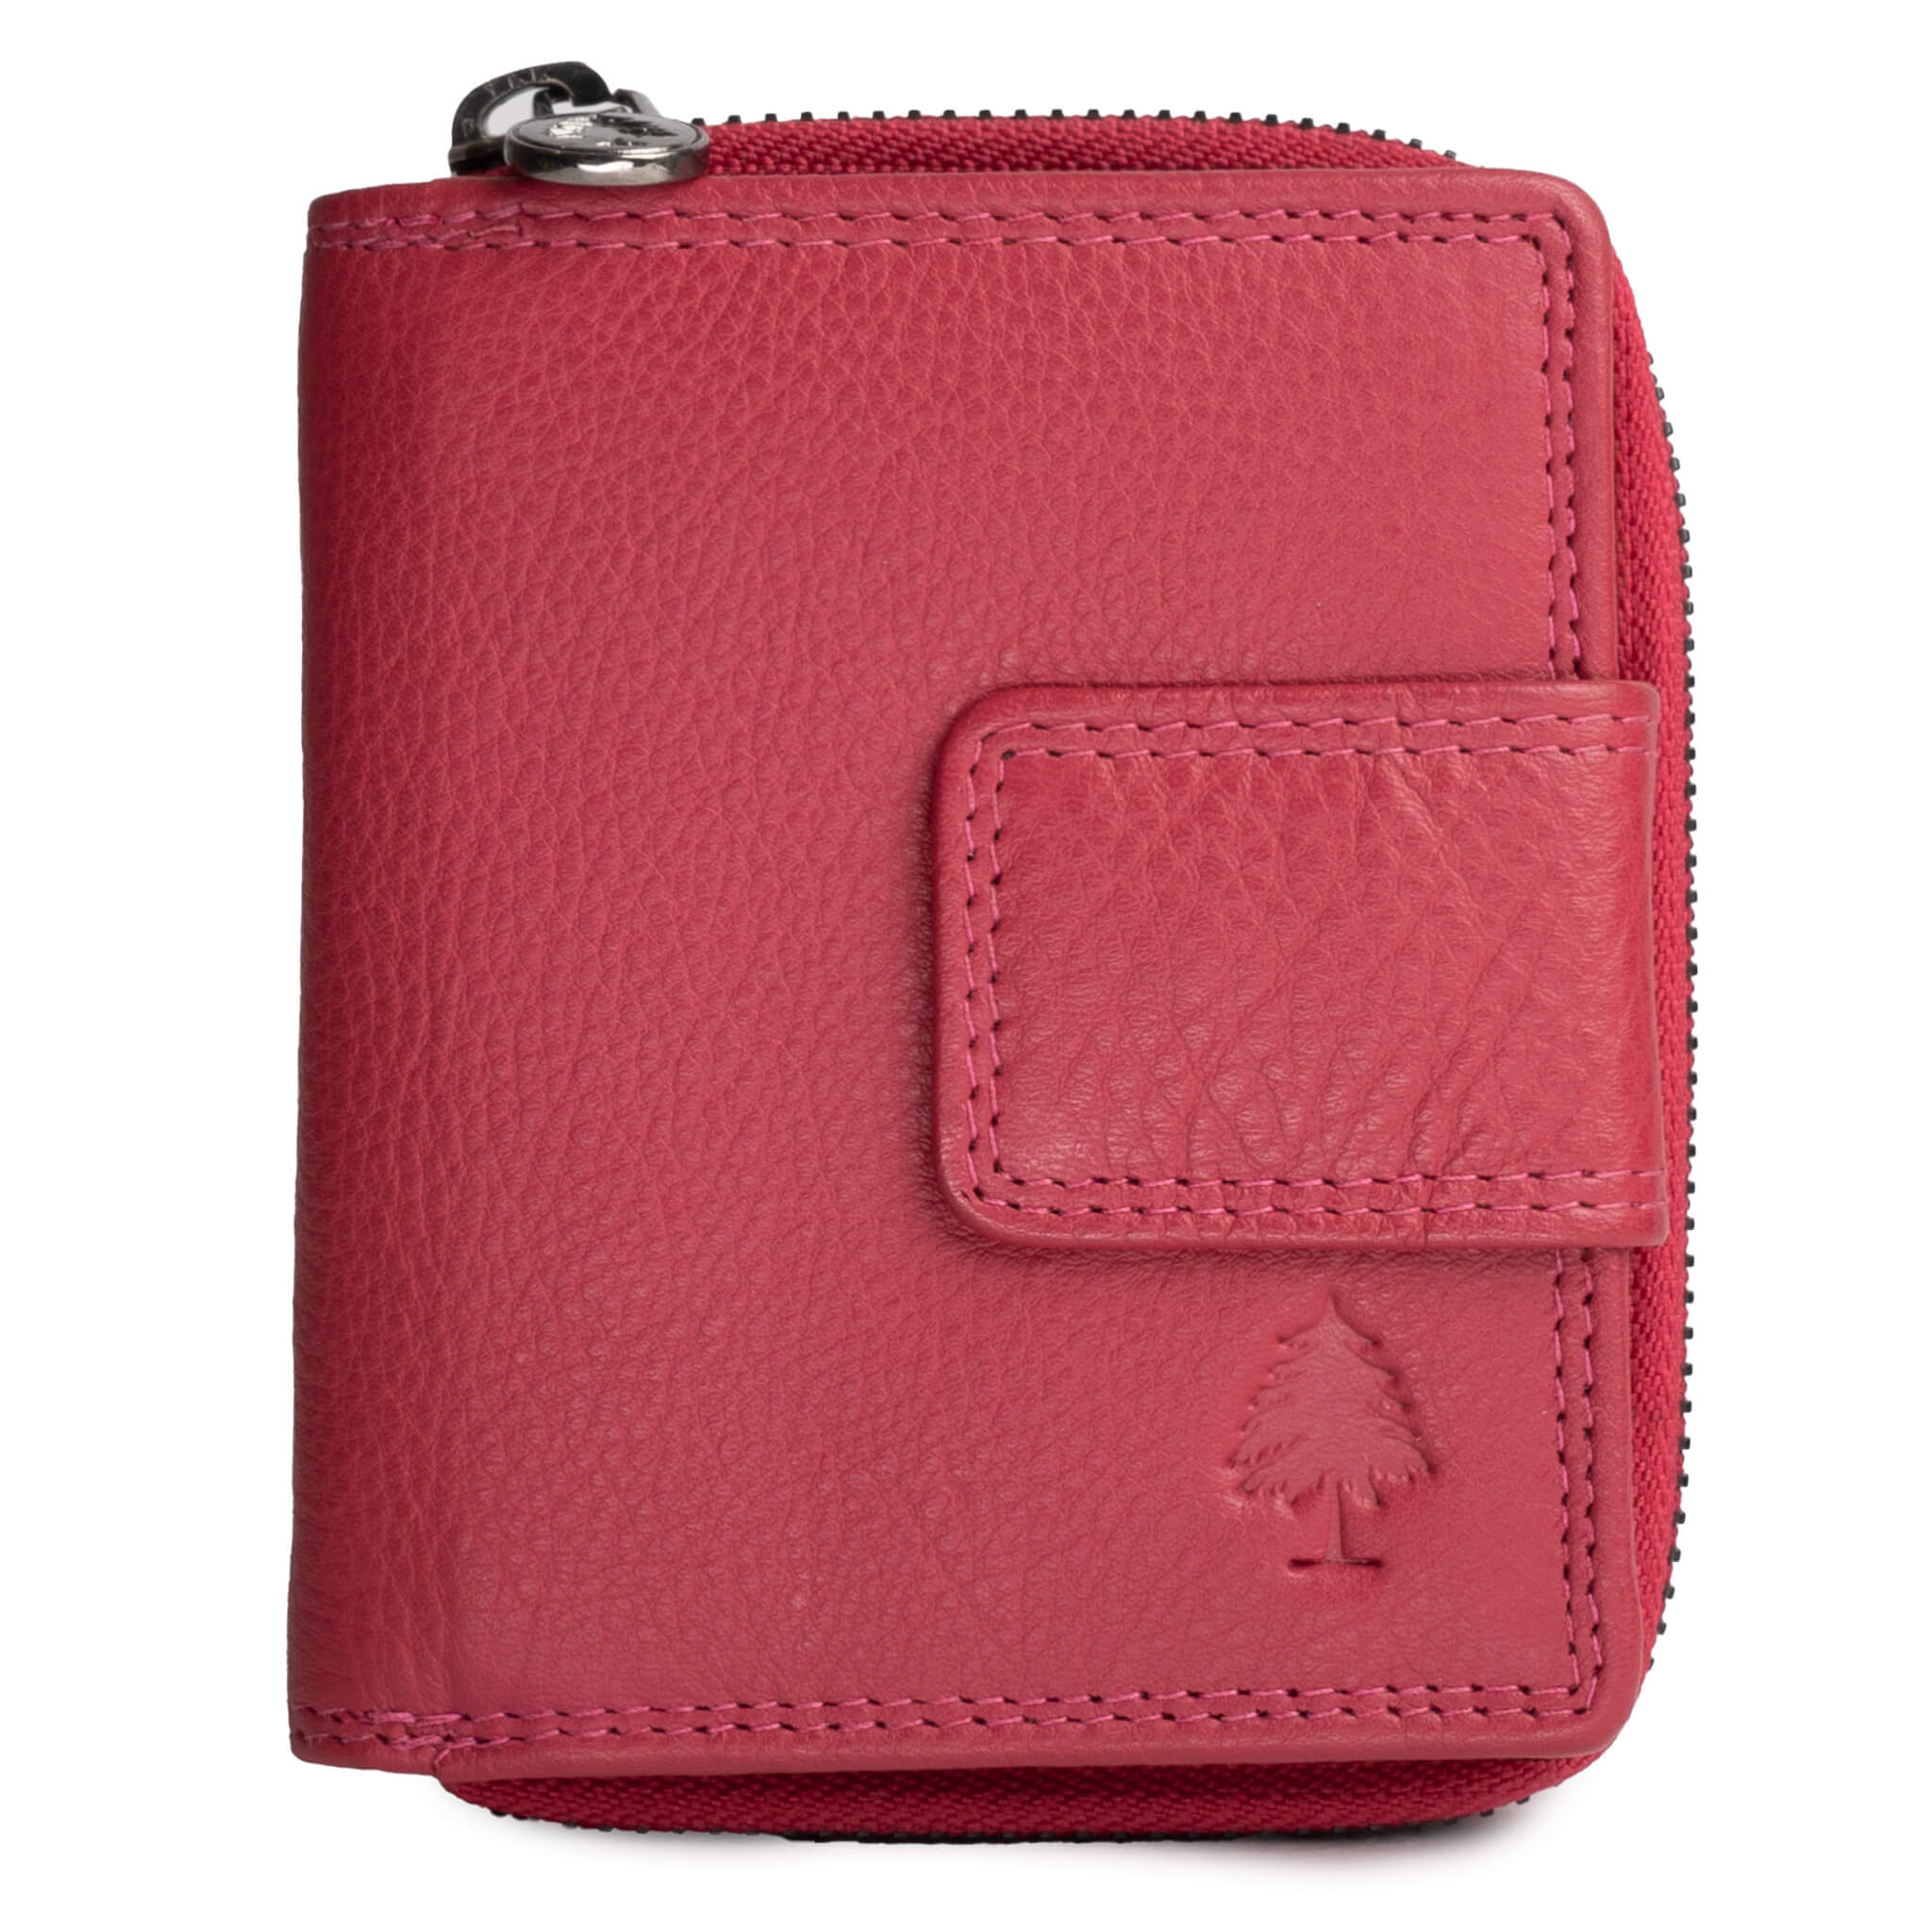 Akiro Small Leather Wallet Women with Zip Compartment Men